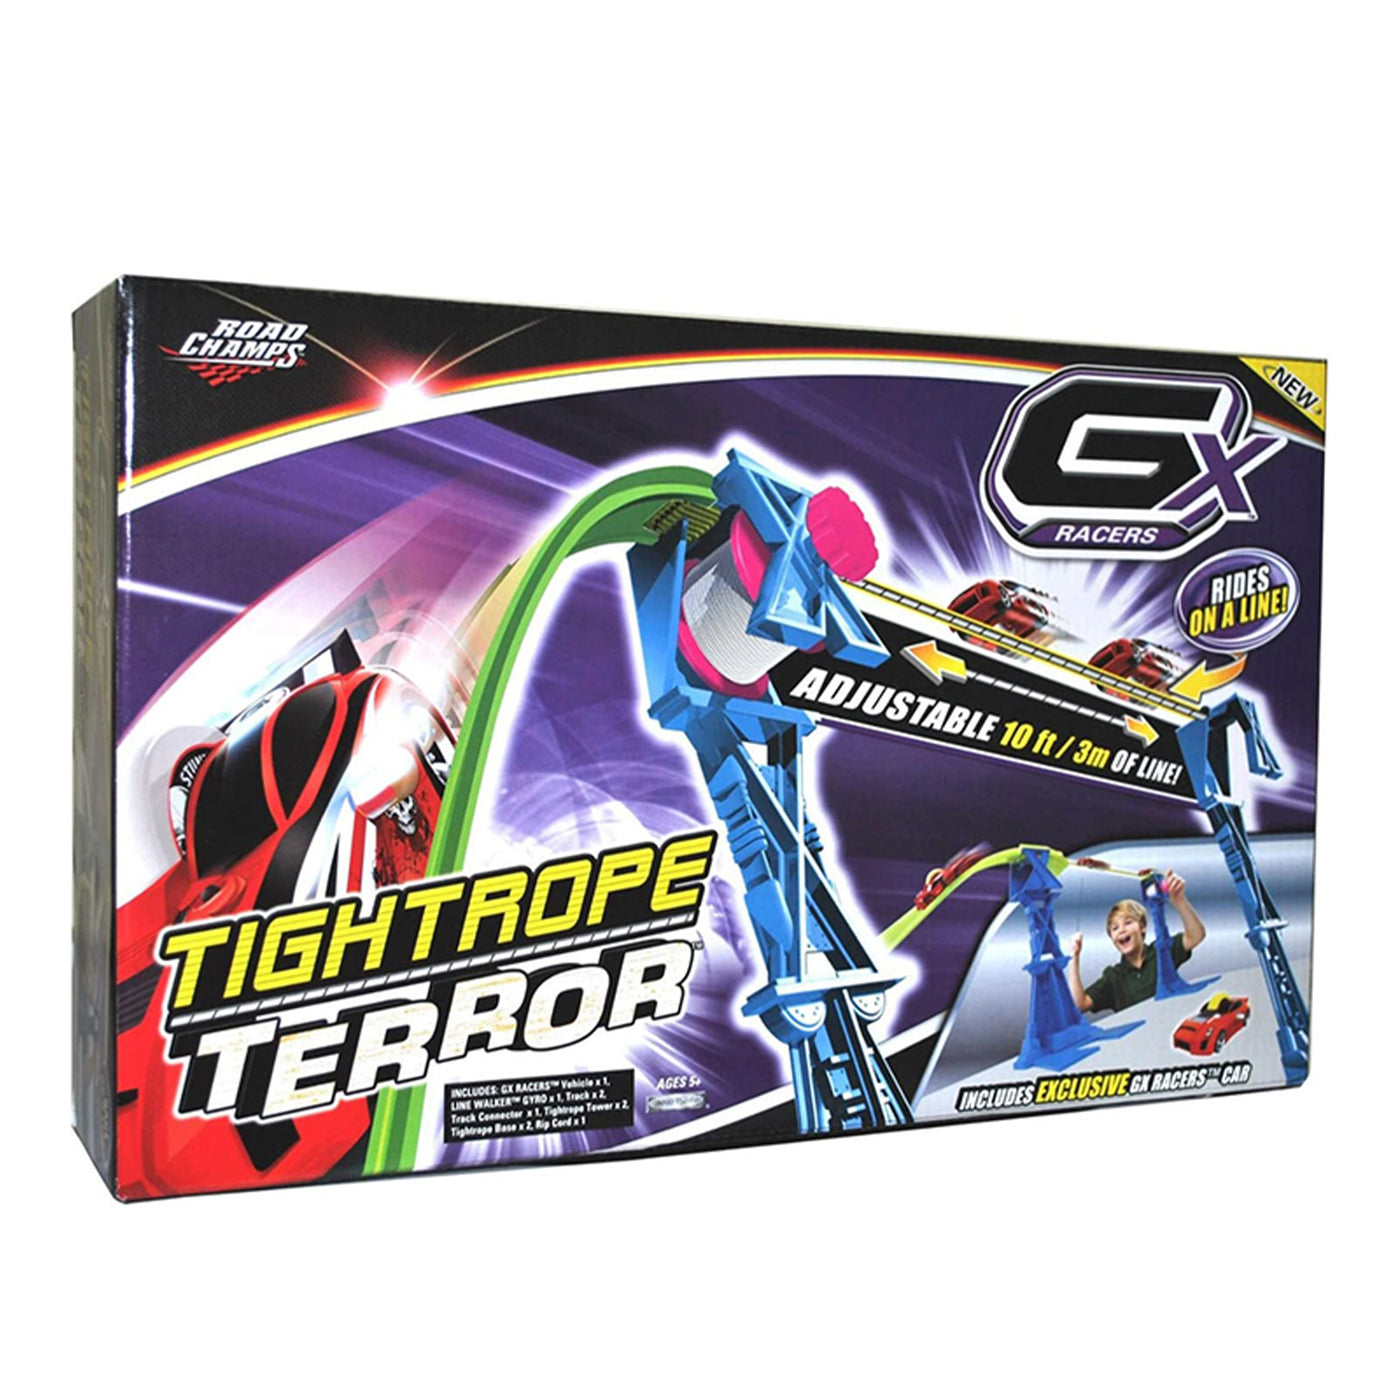 Road Champs® GX Racer Tightrope Terror